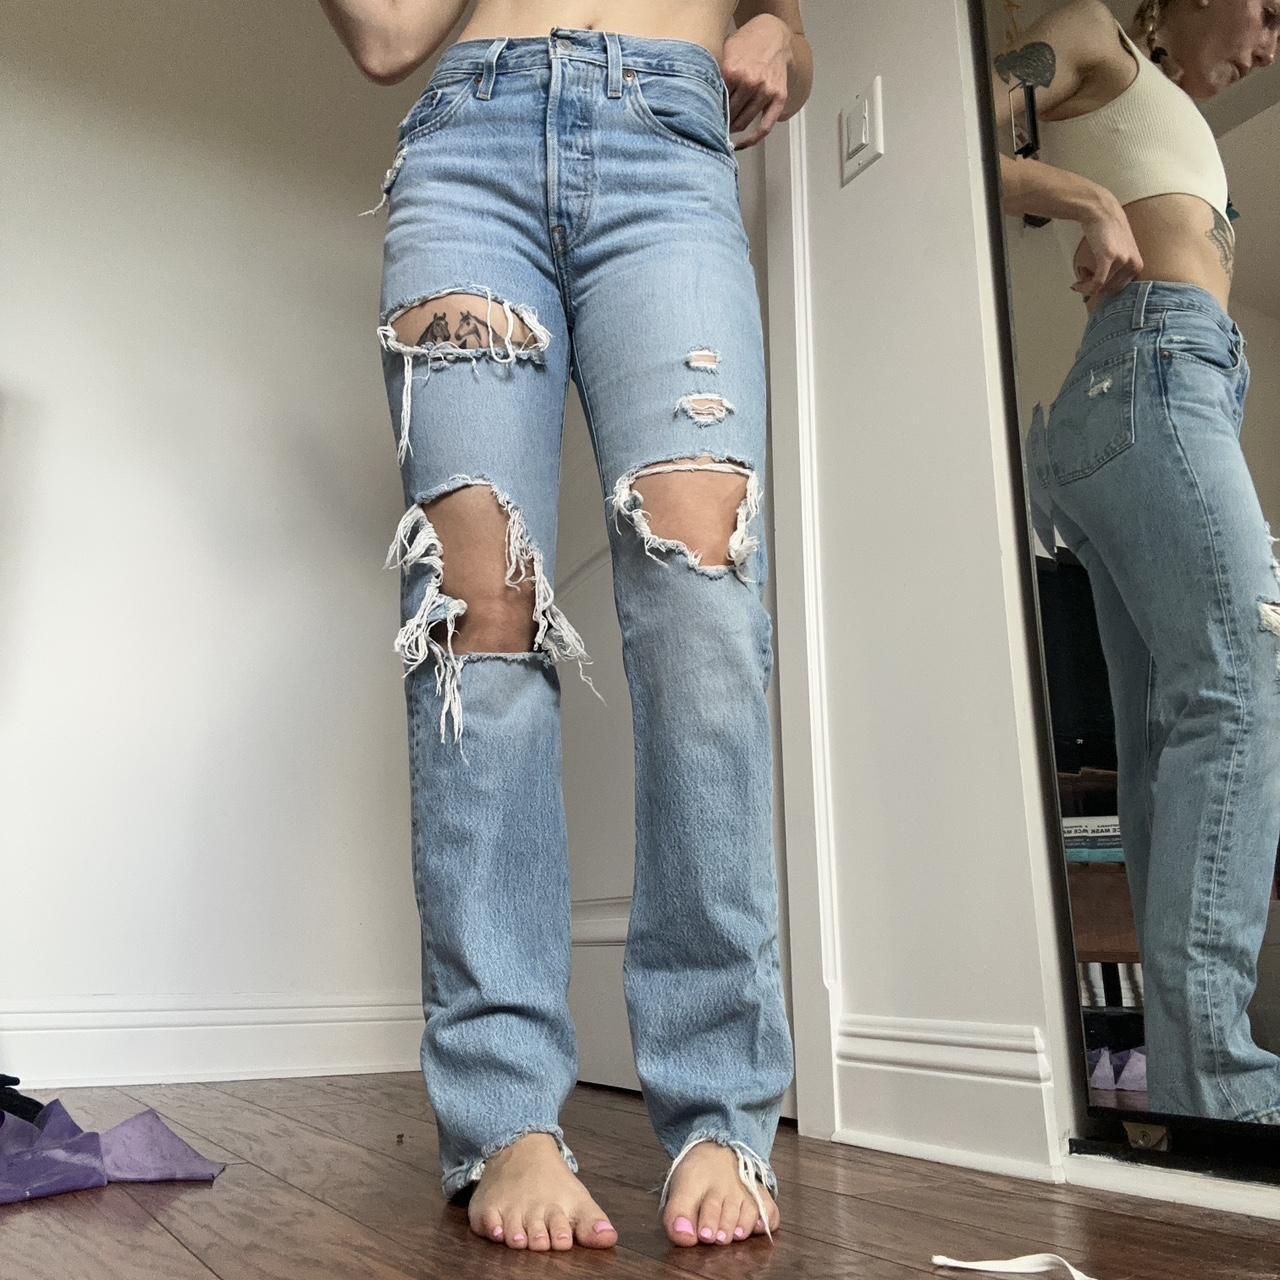 Distressed levis. Boot cut. I don’t know which style... - Depop